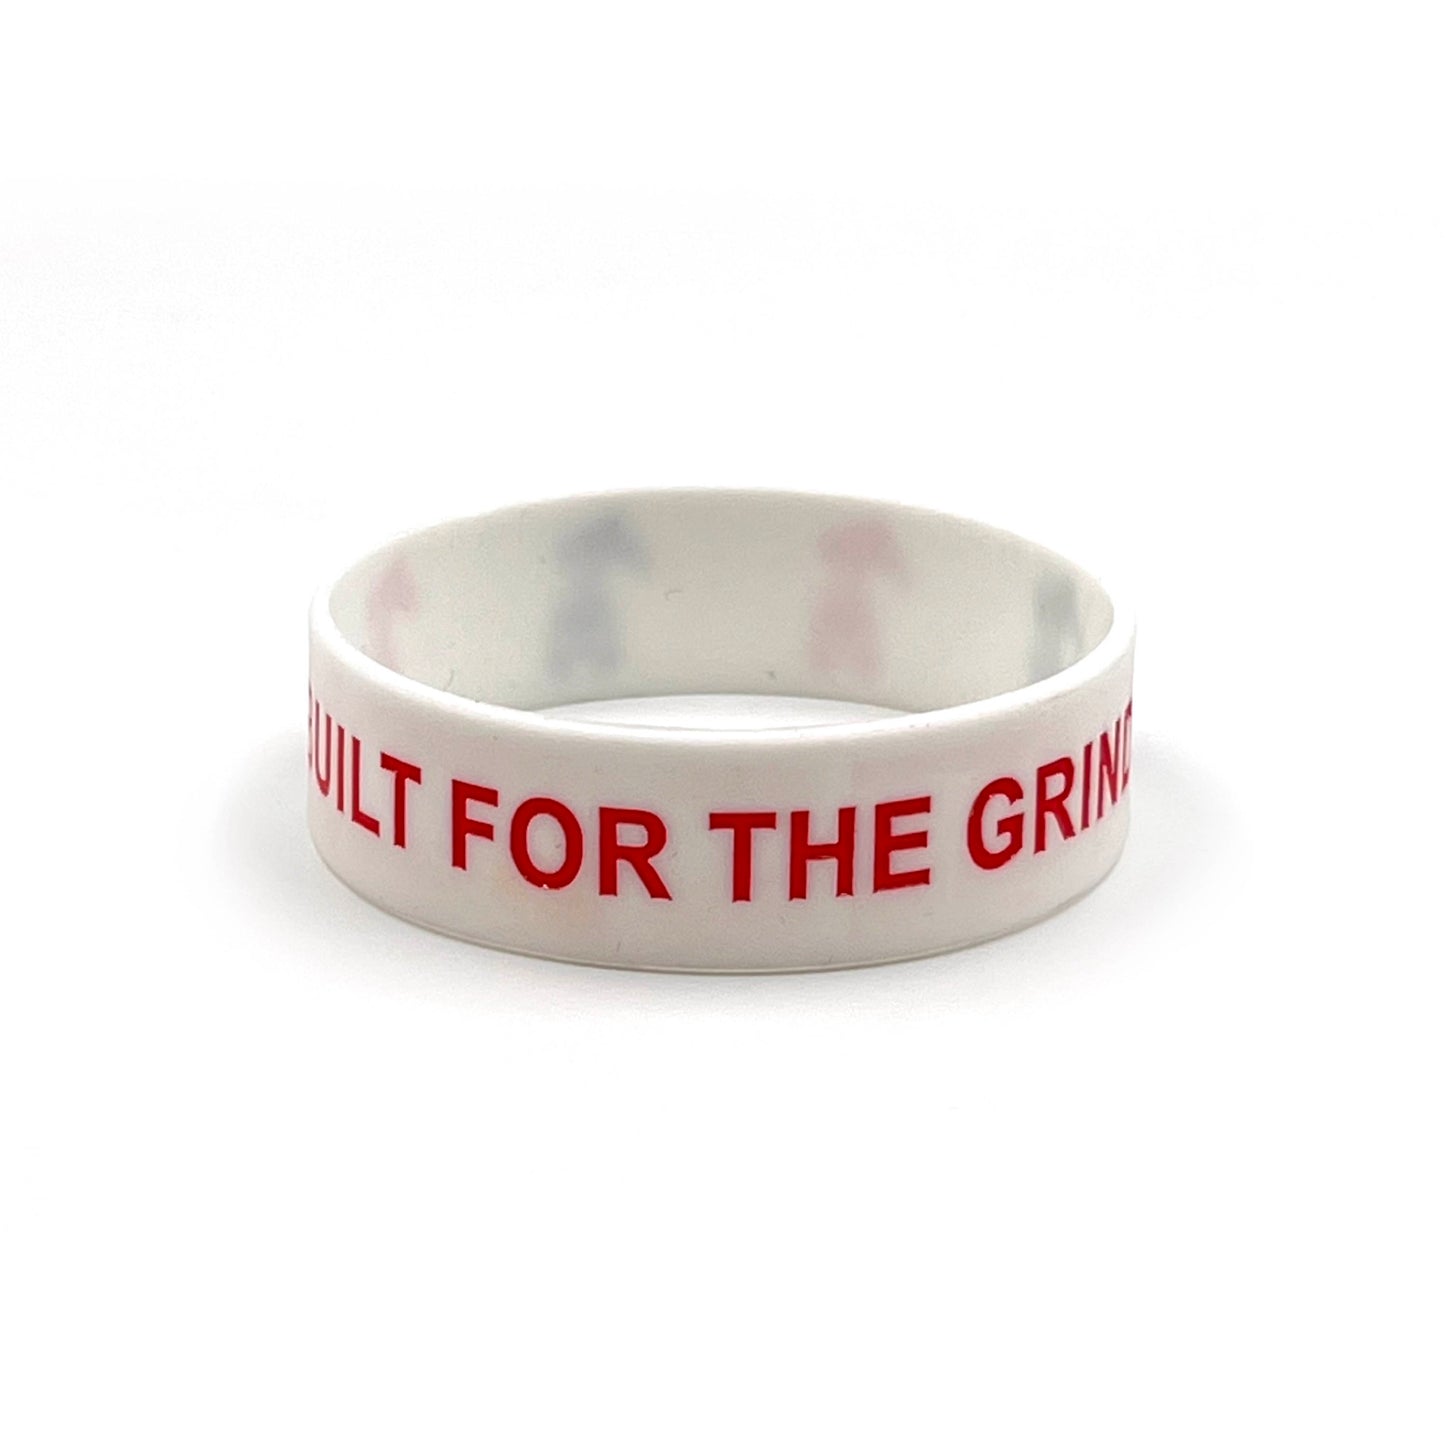 White wristband with red and black logo.  Also has Built For The Grind spelled out.